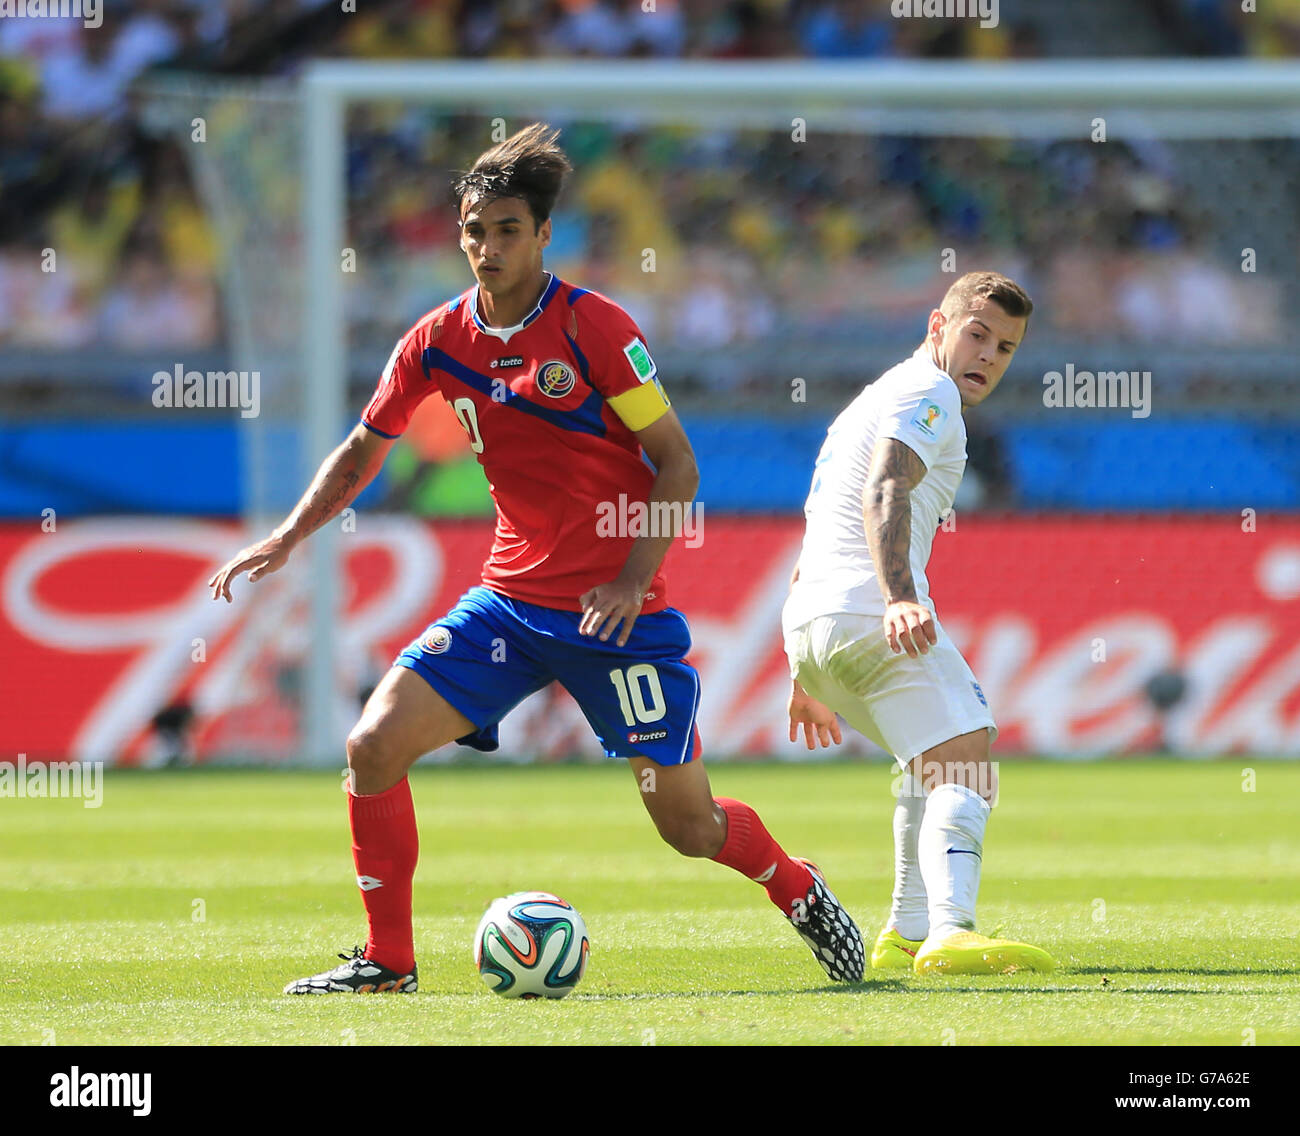 England's Jack Wilshere (right) and Costa Rica's Bryan Ruiz battle for the ball during the FIFA World Cup, Group D match at the Estadio Mineirao, Belo Horizonte, Brazil. Stock Photo